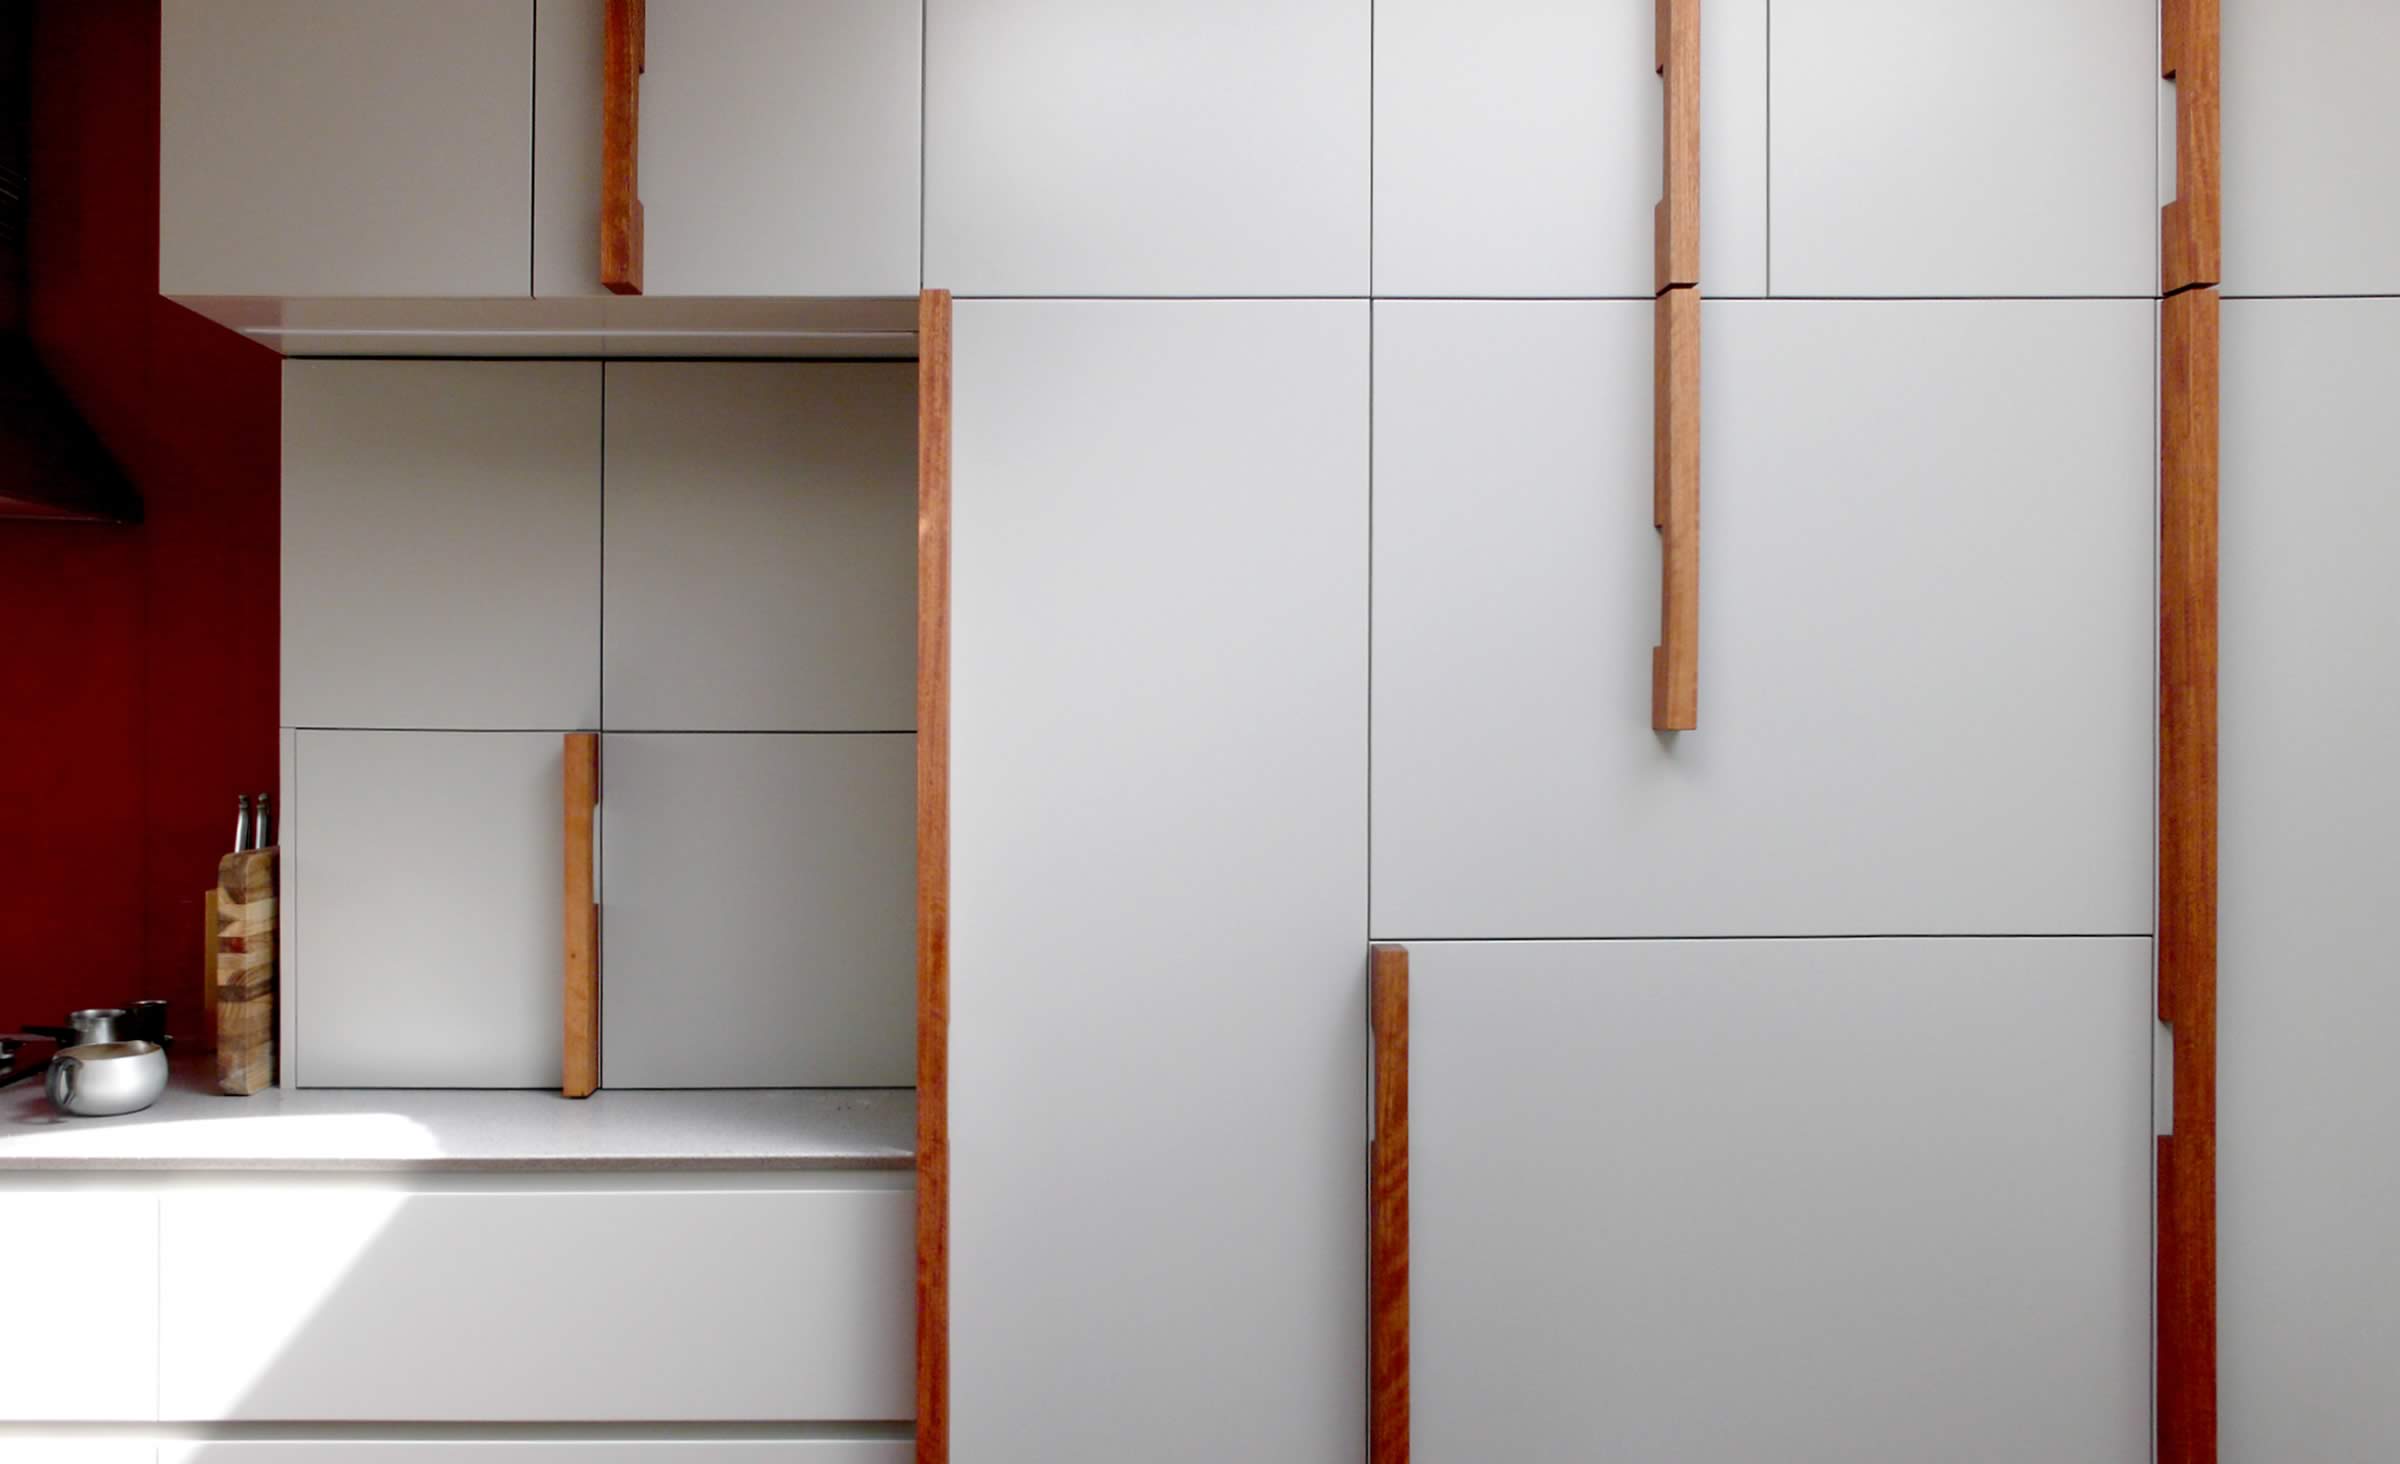 Customised kitchen joinery incorporating one-off design spotted gum timber handles.